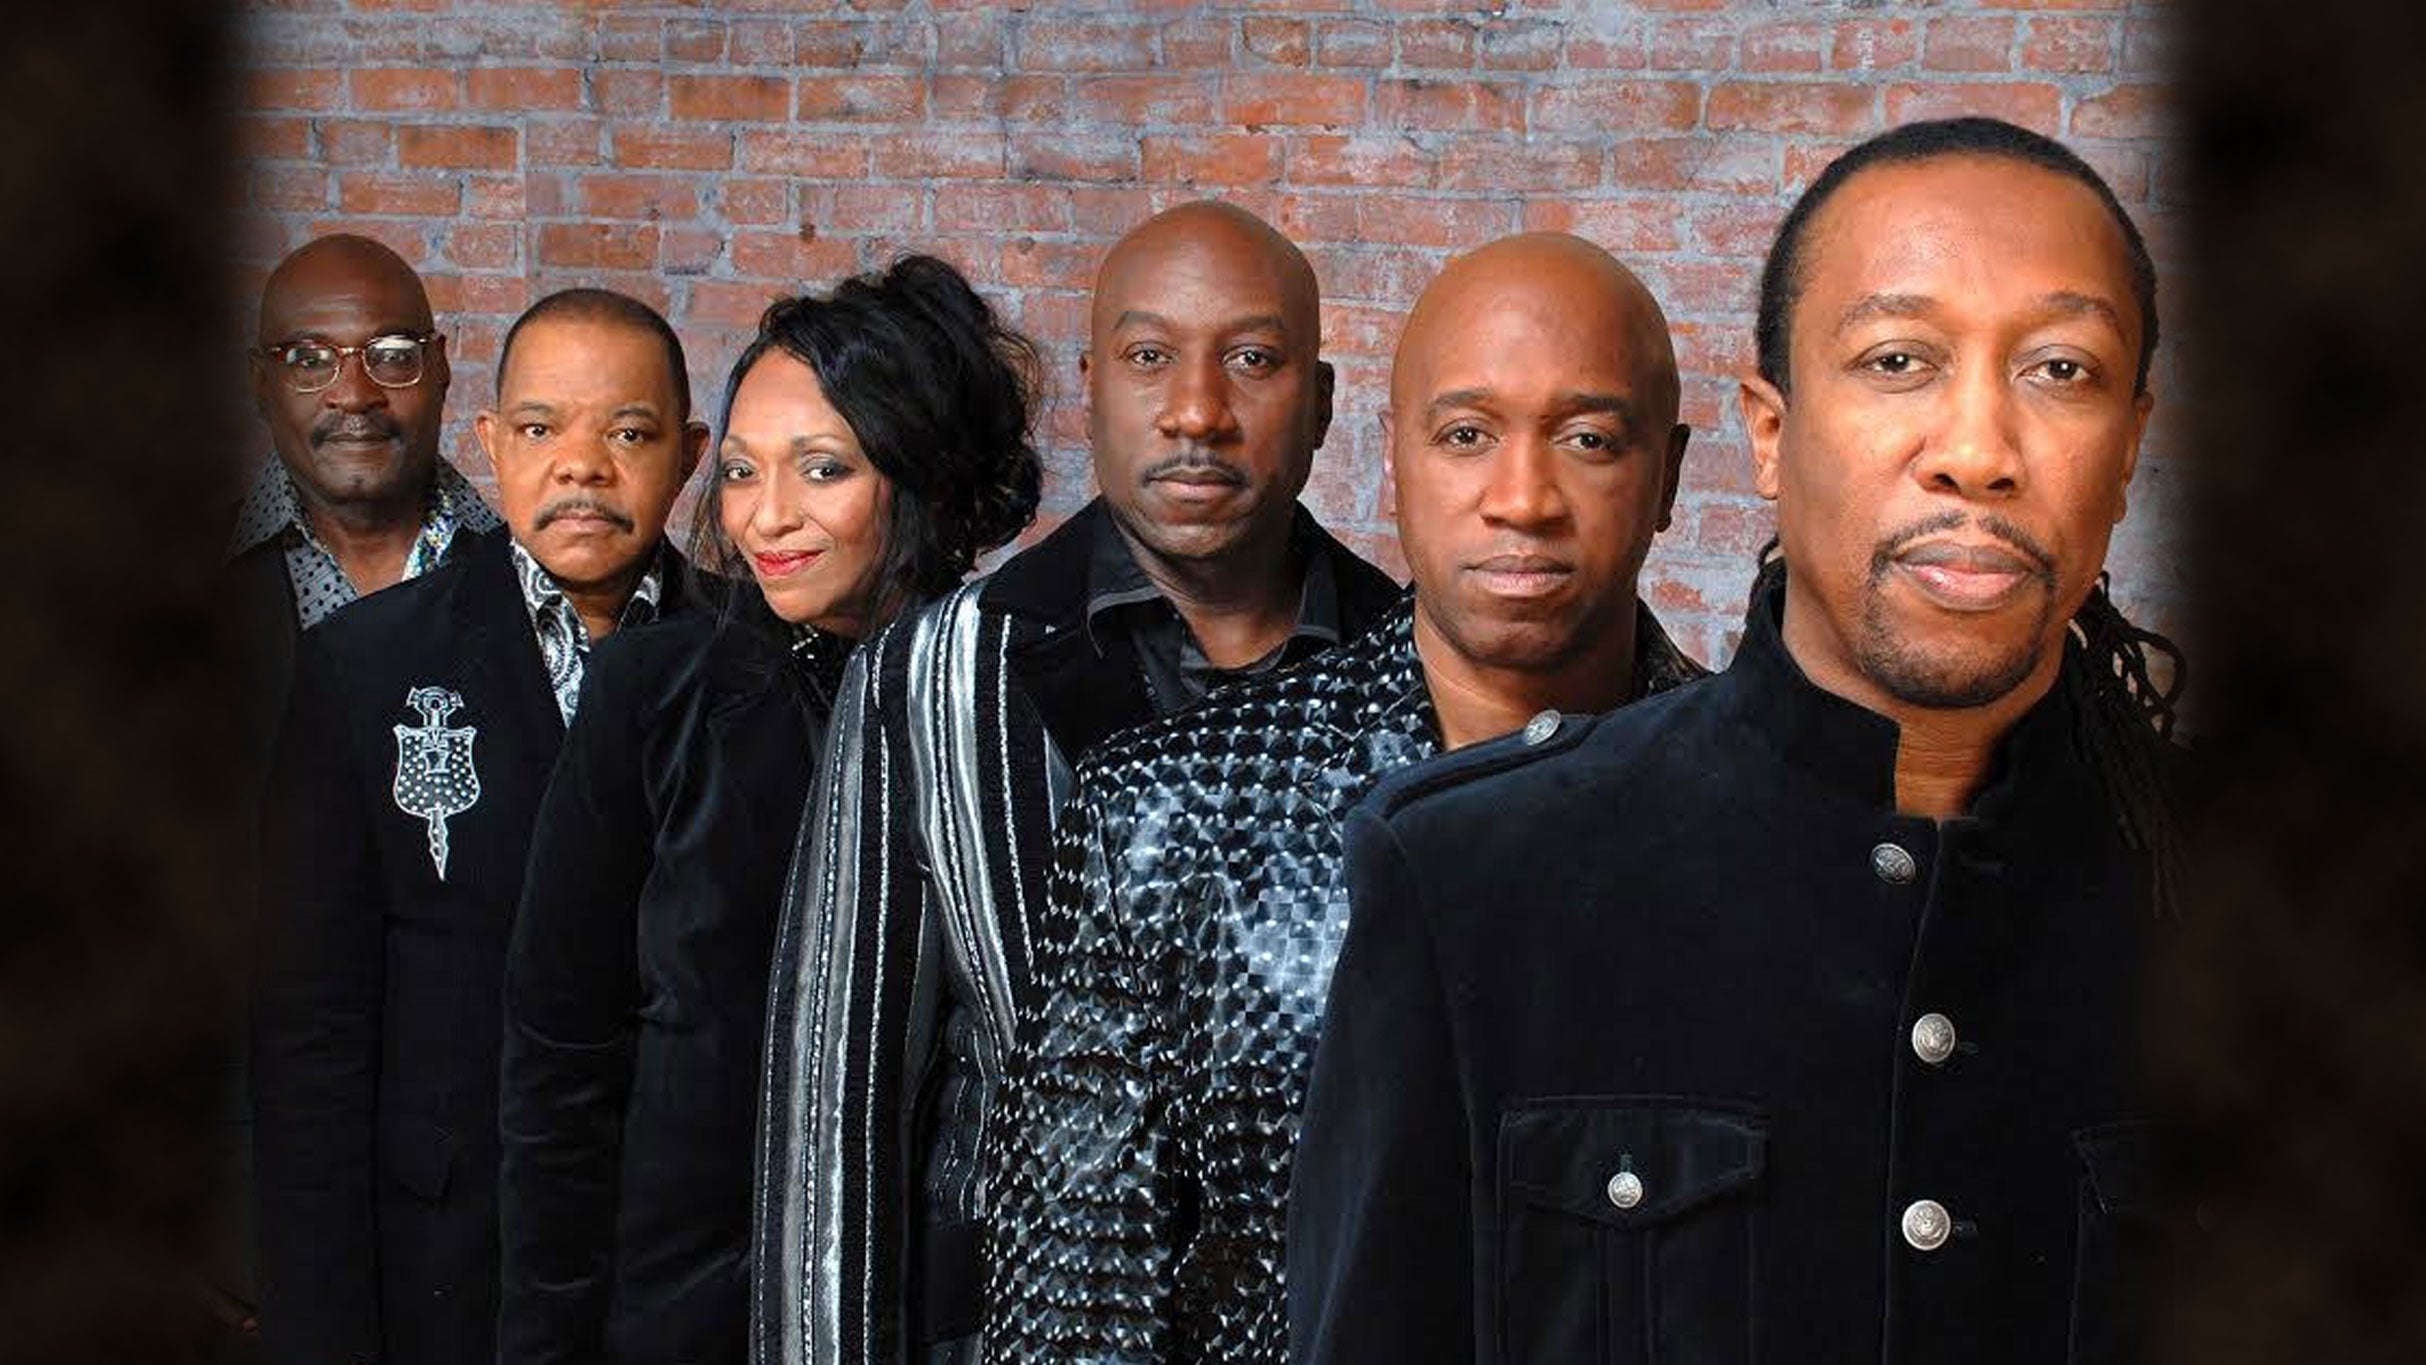 An Evening of R&B: Midnight Star, SOS Band, Miki Howard, Glenn Jones free presale listing for show tickets in Mableton, GA (Mable House Barnes Amphitheatre)